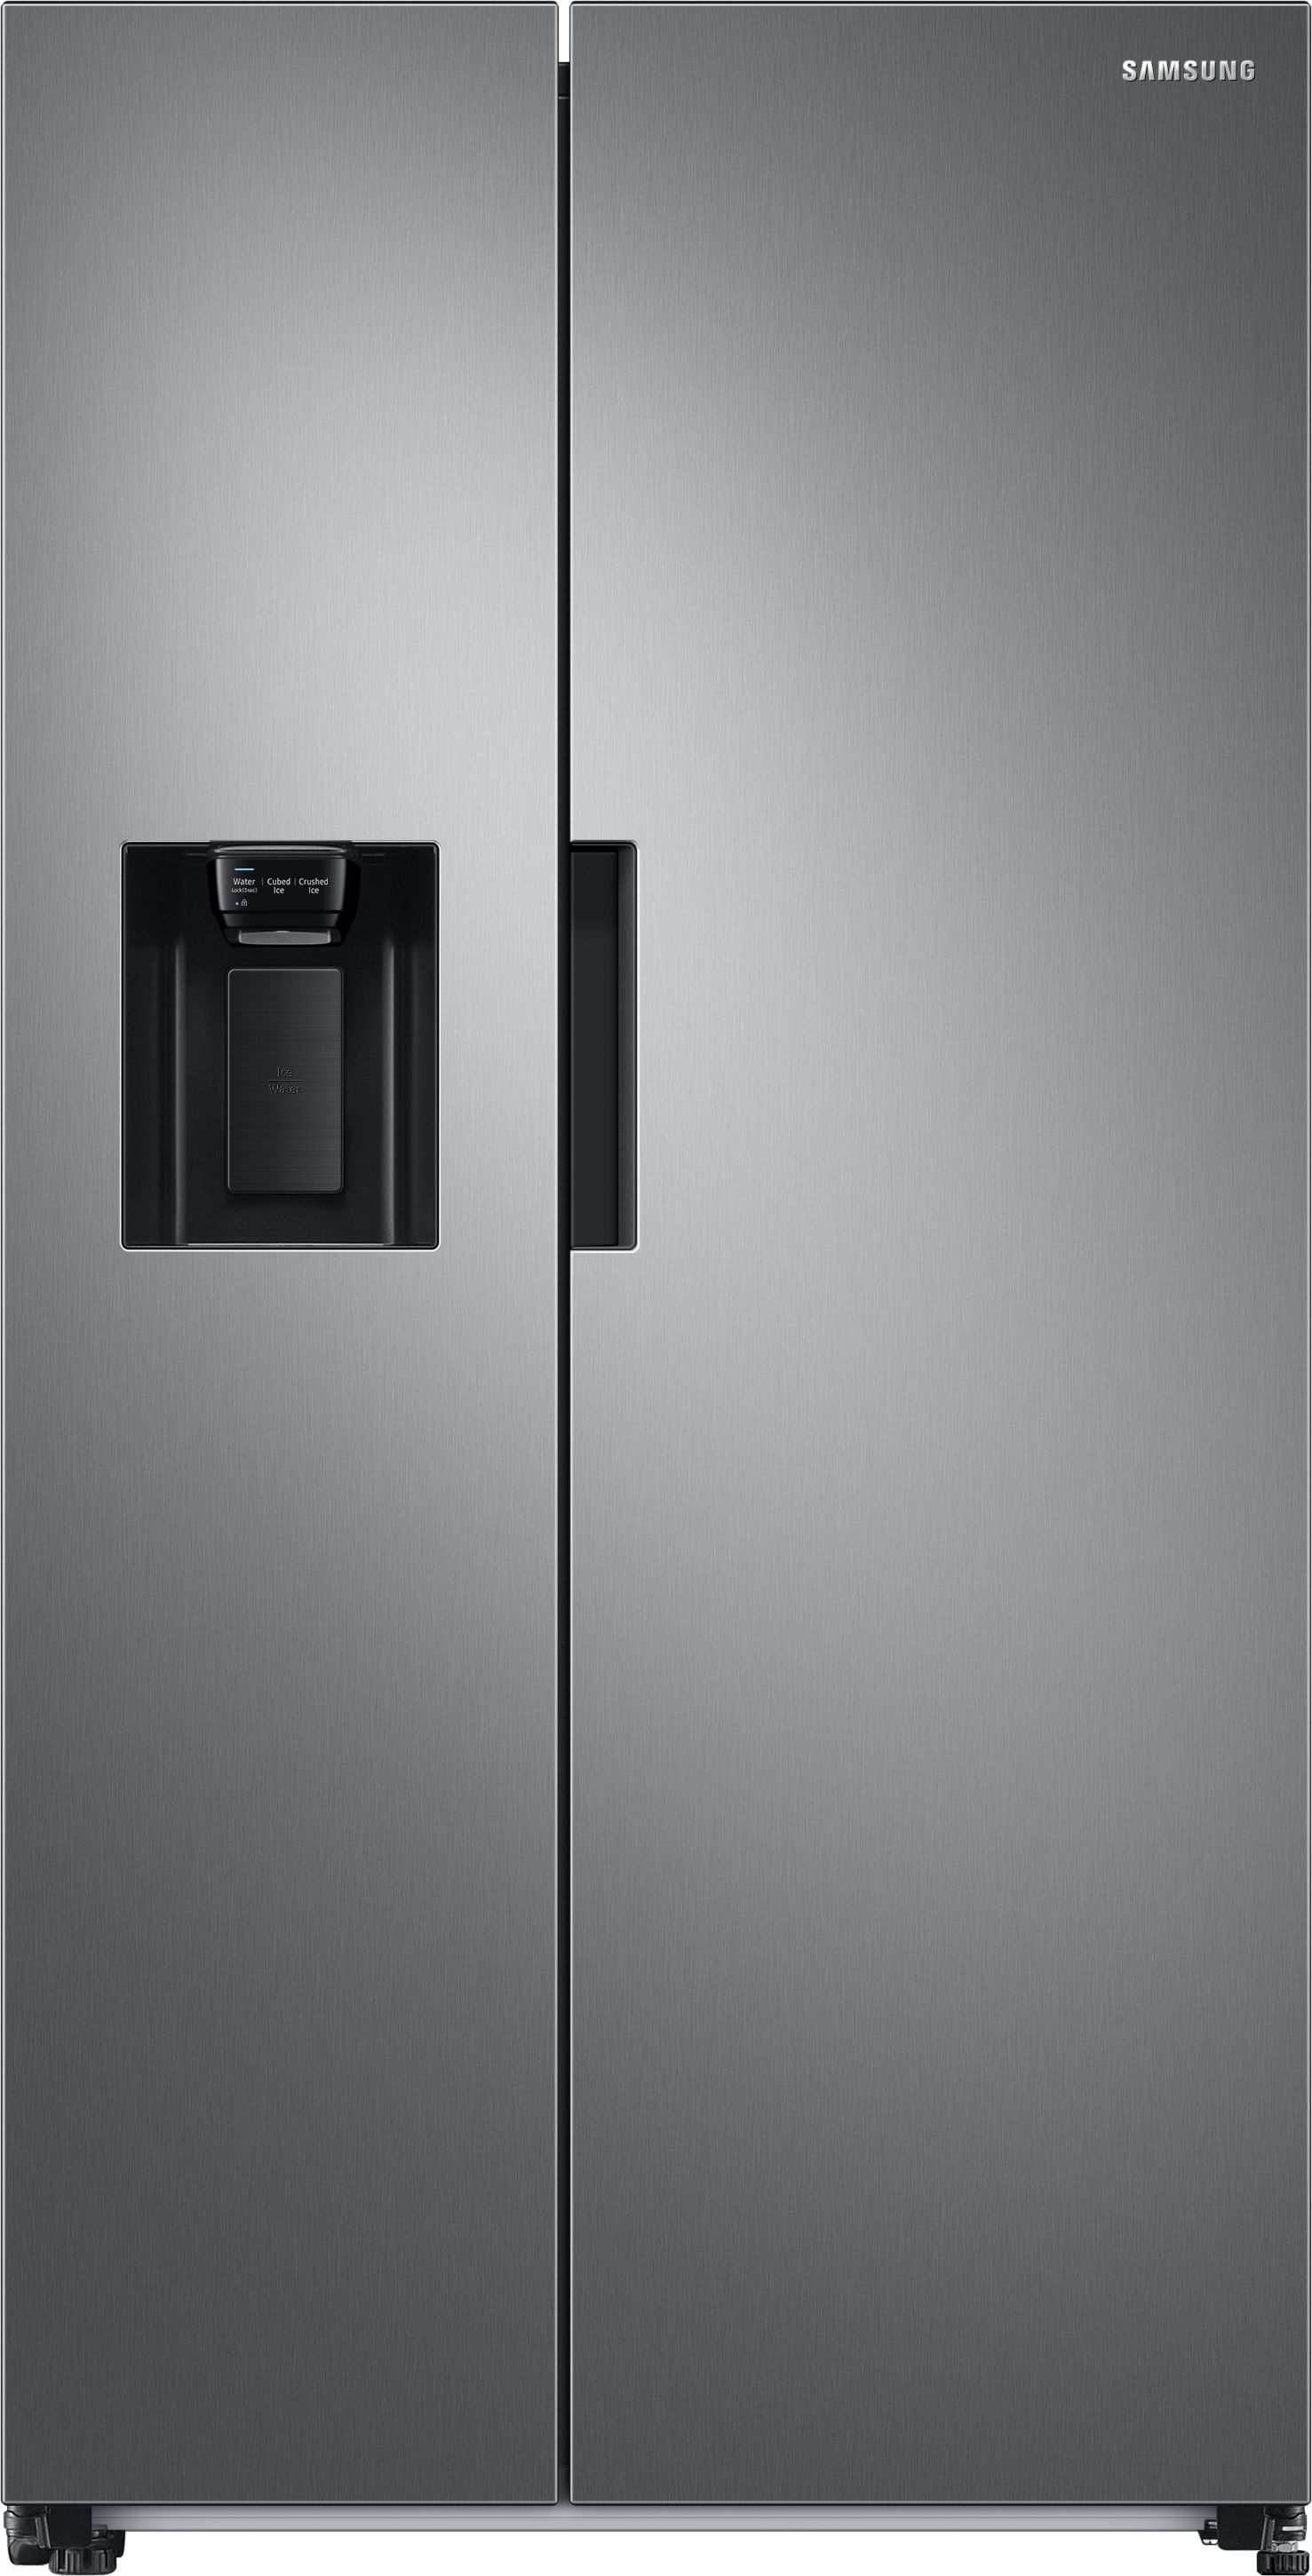 Samsung Series 7 SpaceMax RS67A8811S9EU Total No Frost American Fridge Freezer - Matte Stainless Steel - E Rated, Stainless Steel